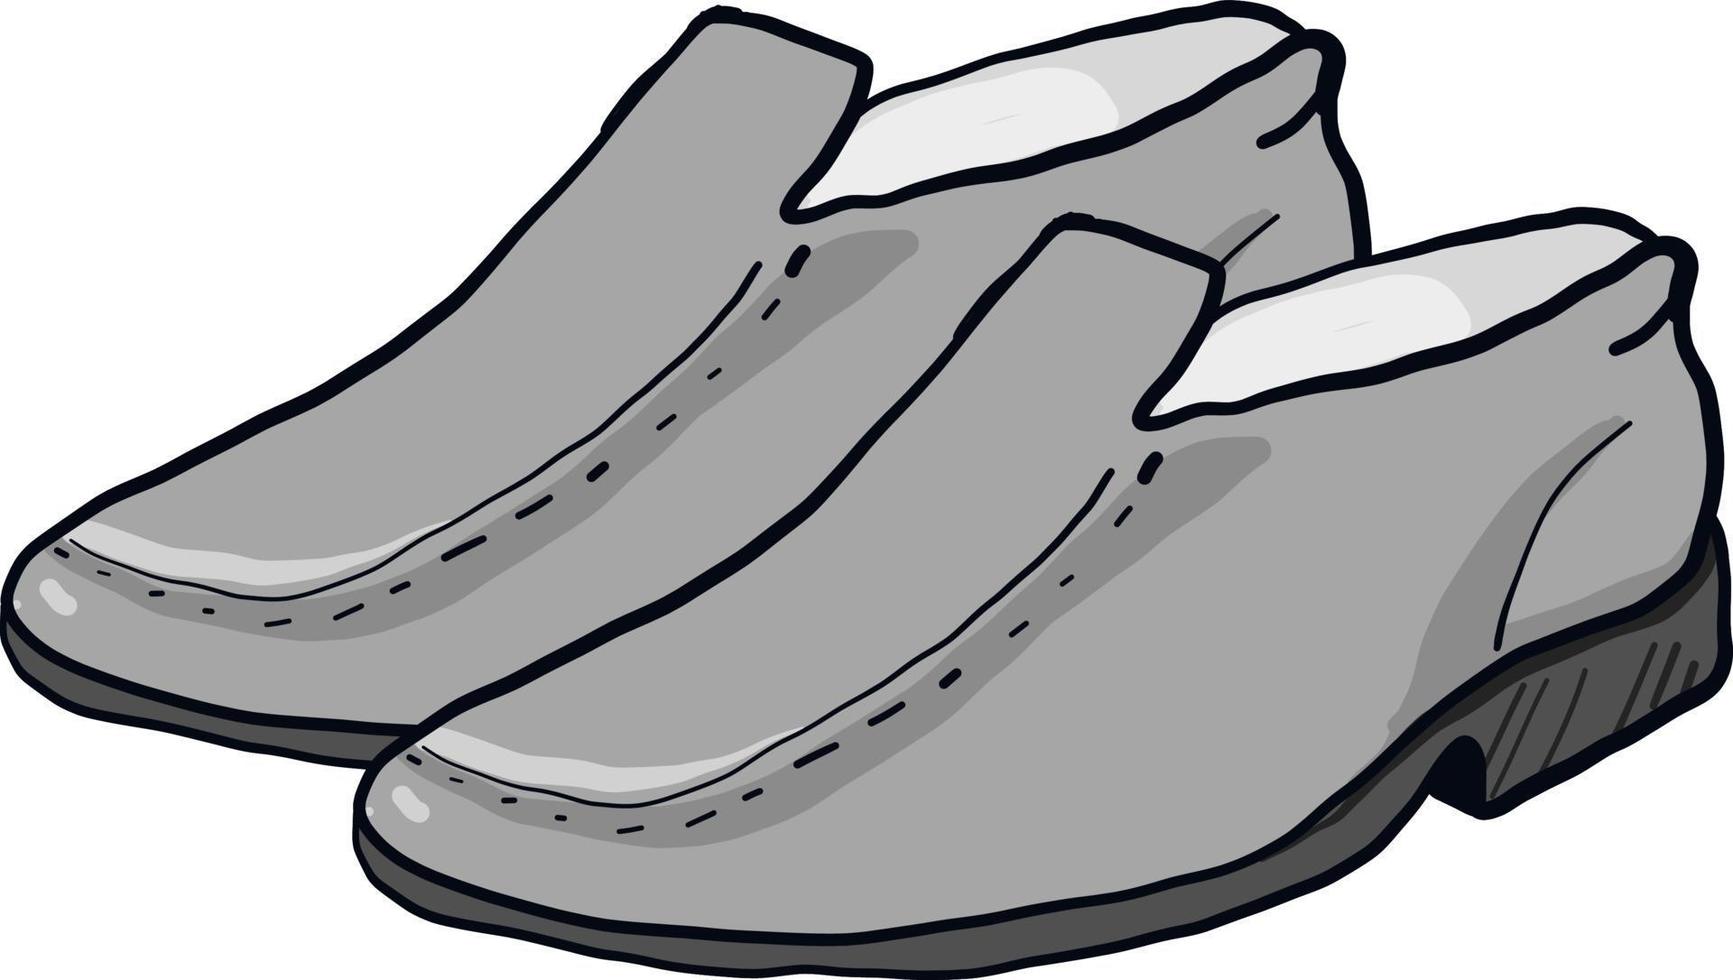 Grey shoes ,illustration,vector on white background vector